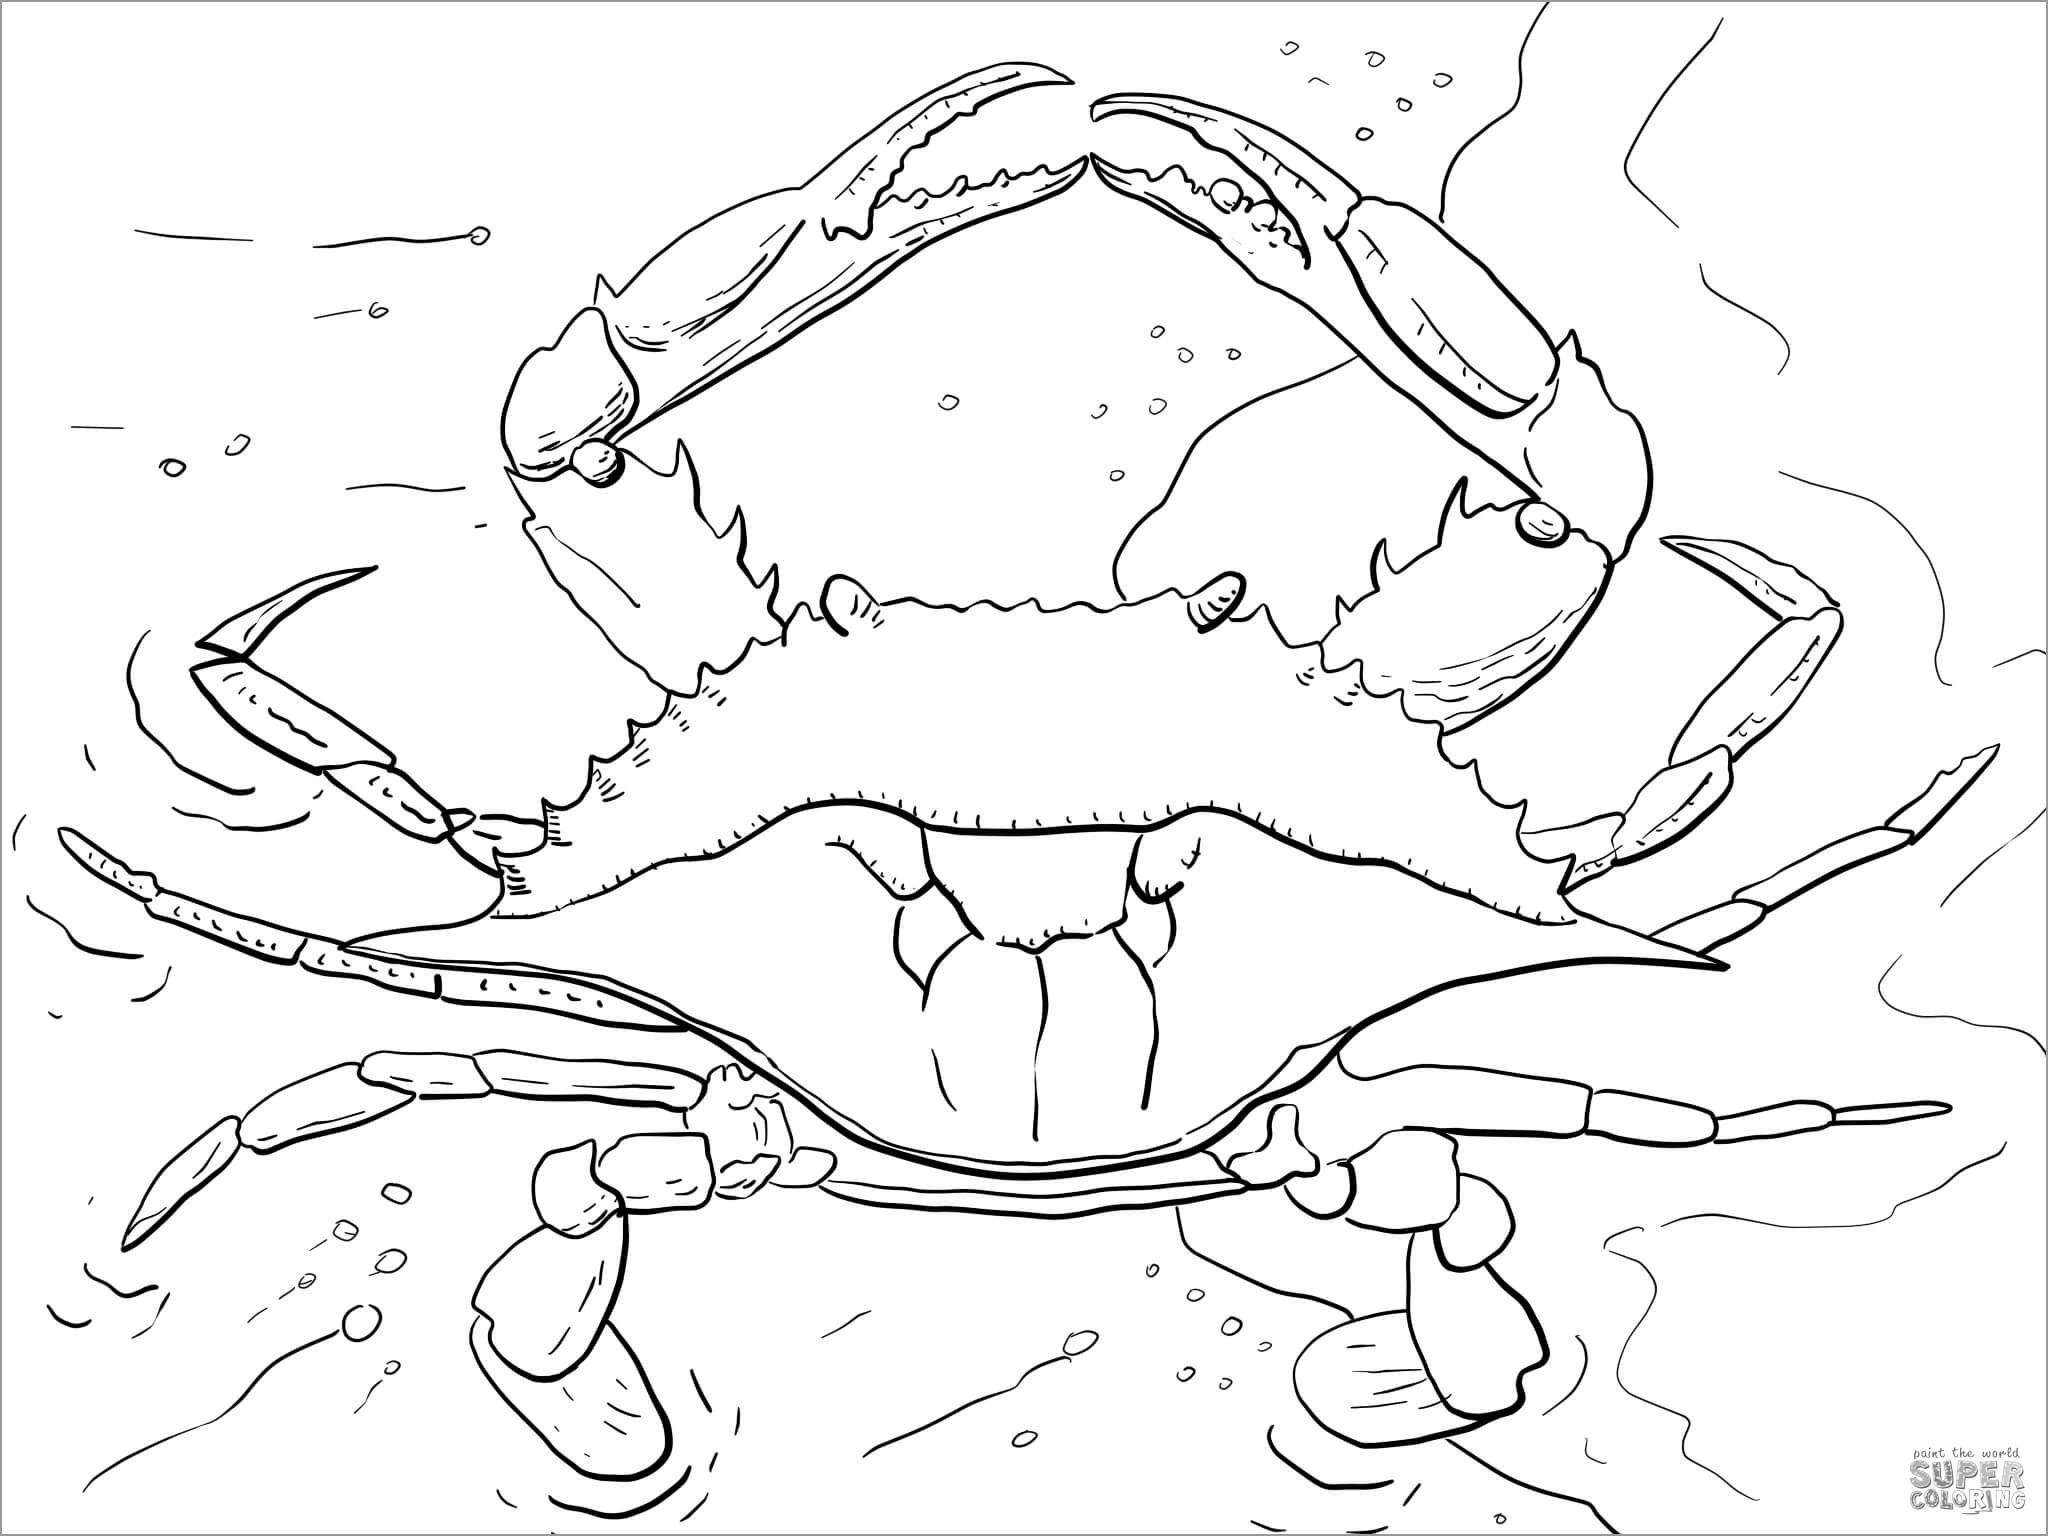 Realistic Crab Coloring Page for Adult